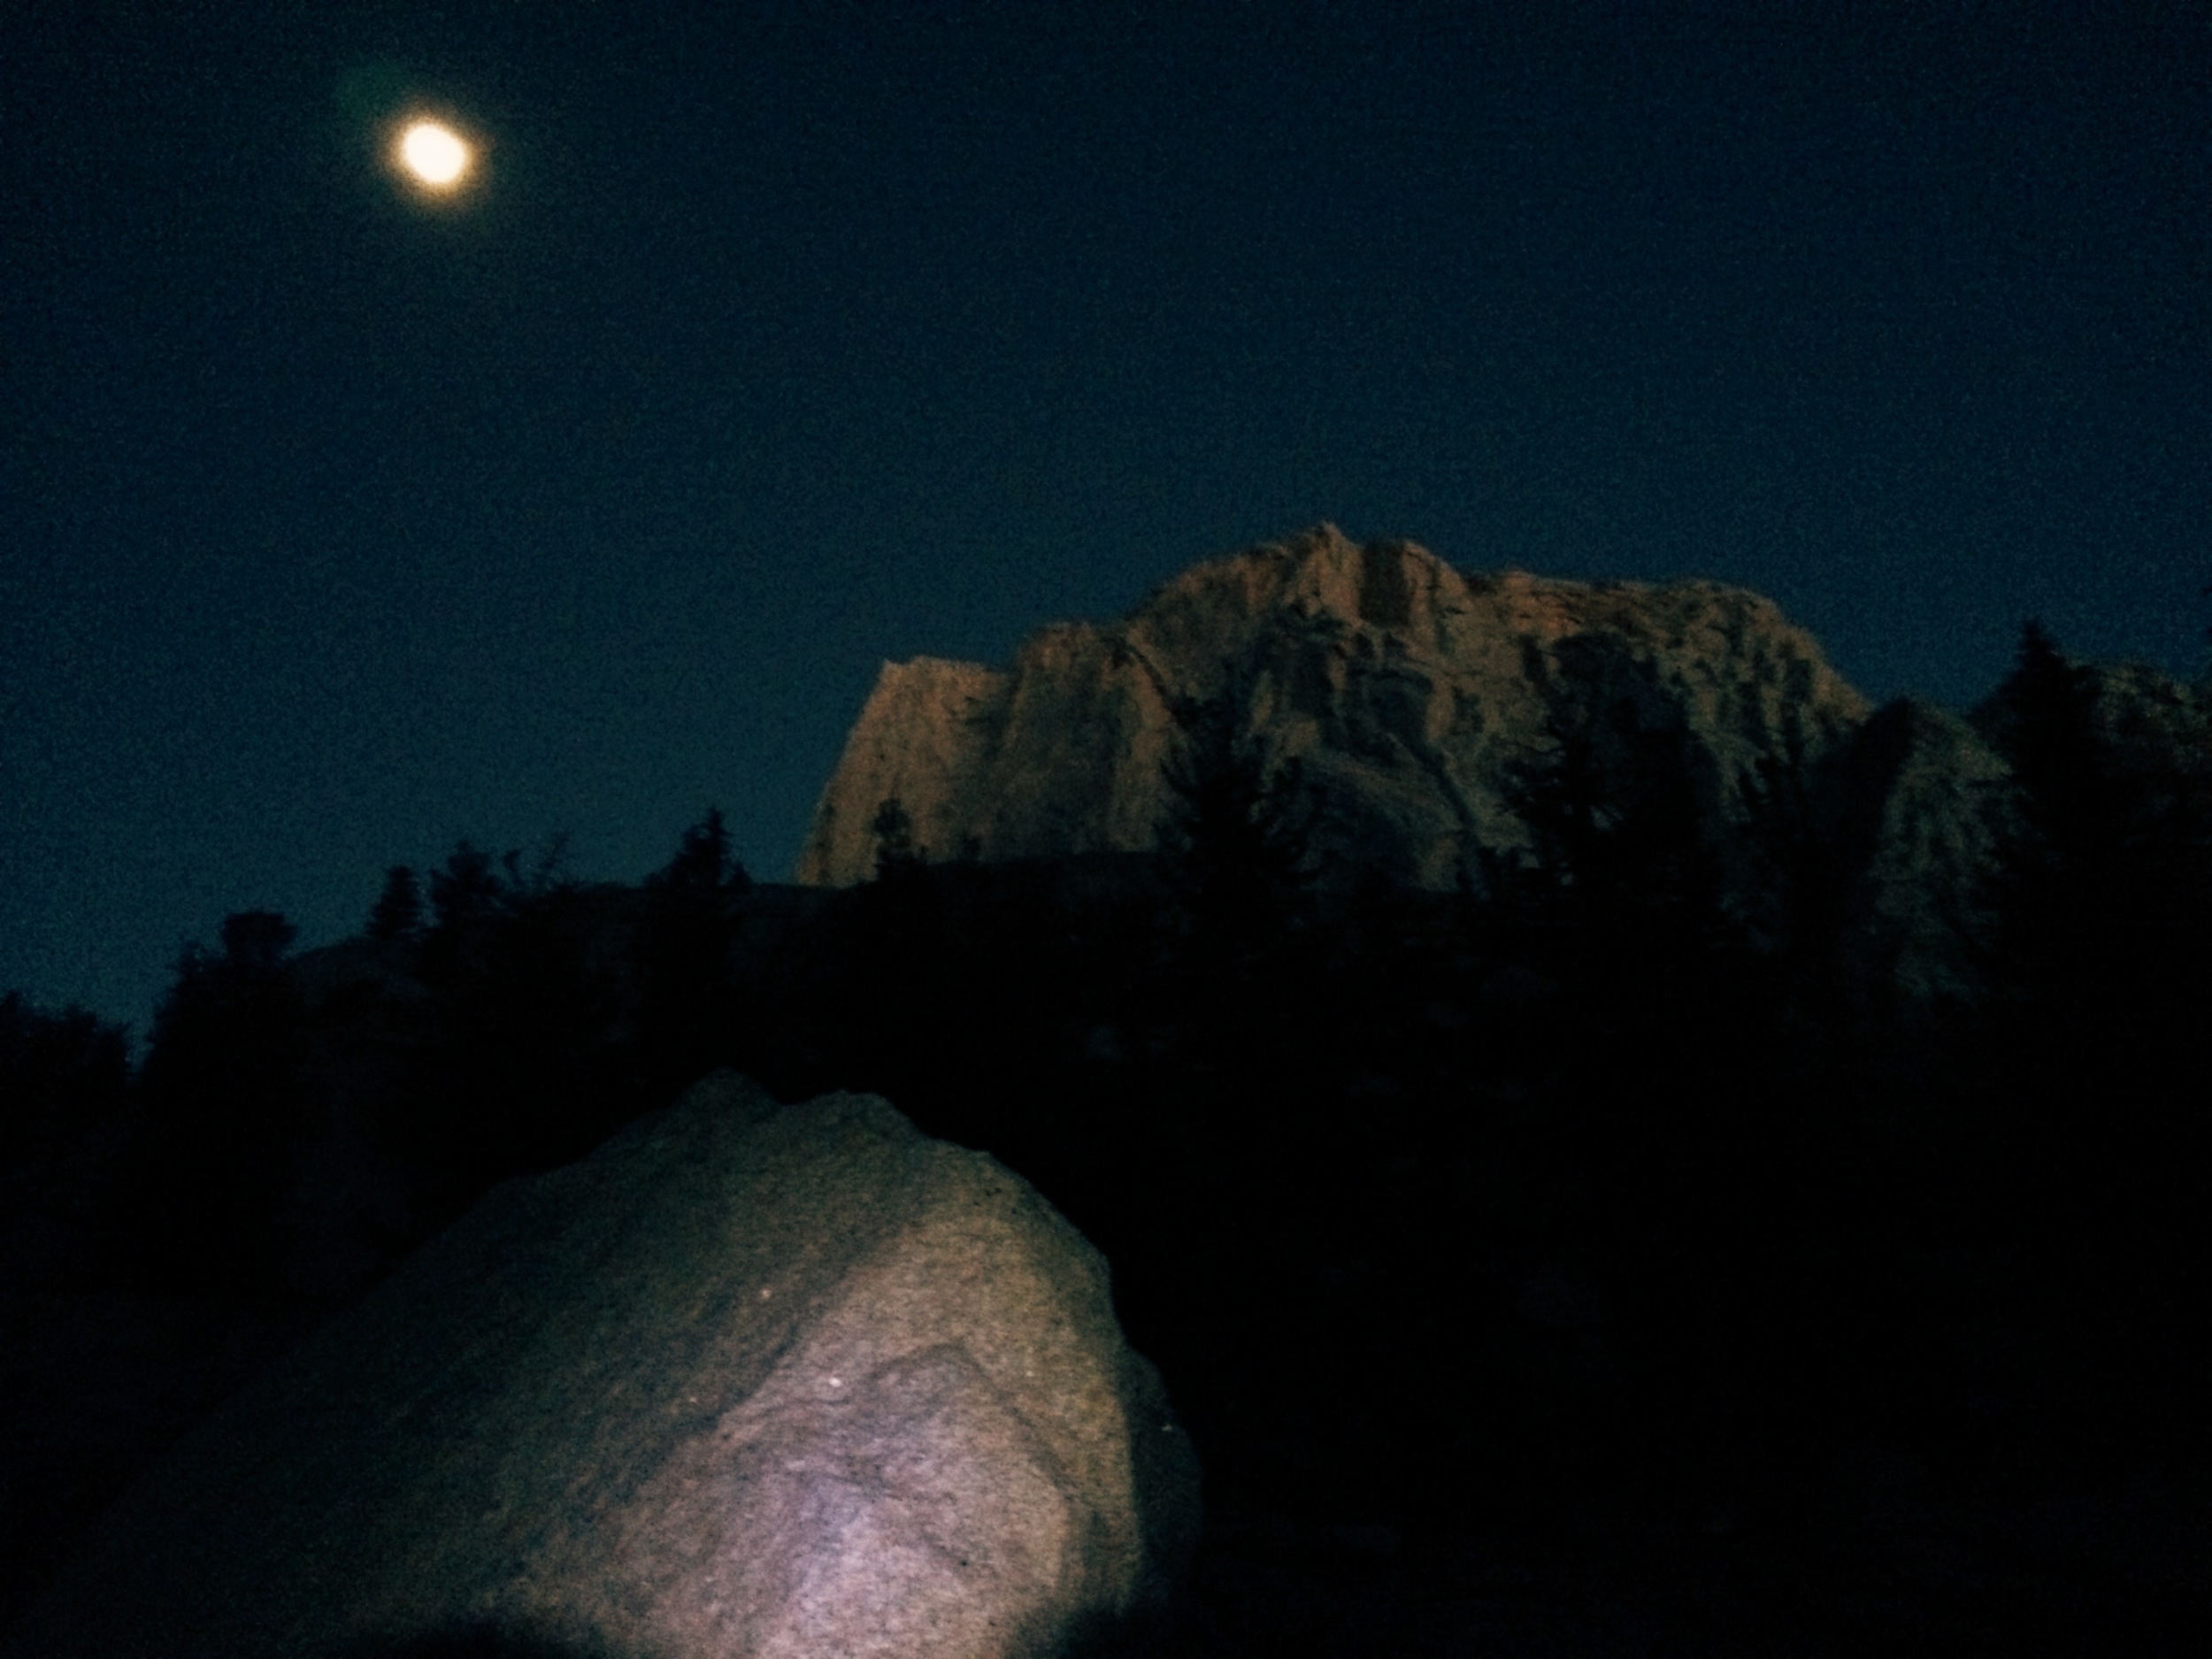  The moon was still high up in the sky as the first hints of sunlight began to illuminate the mountains. 